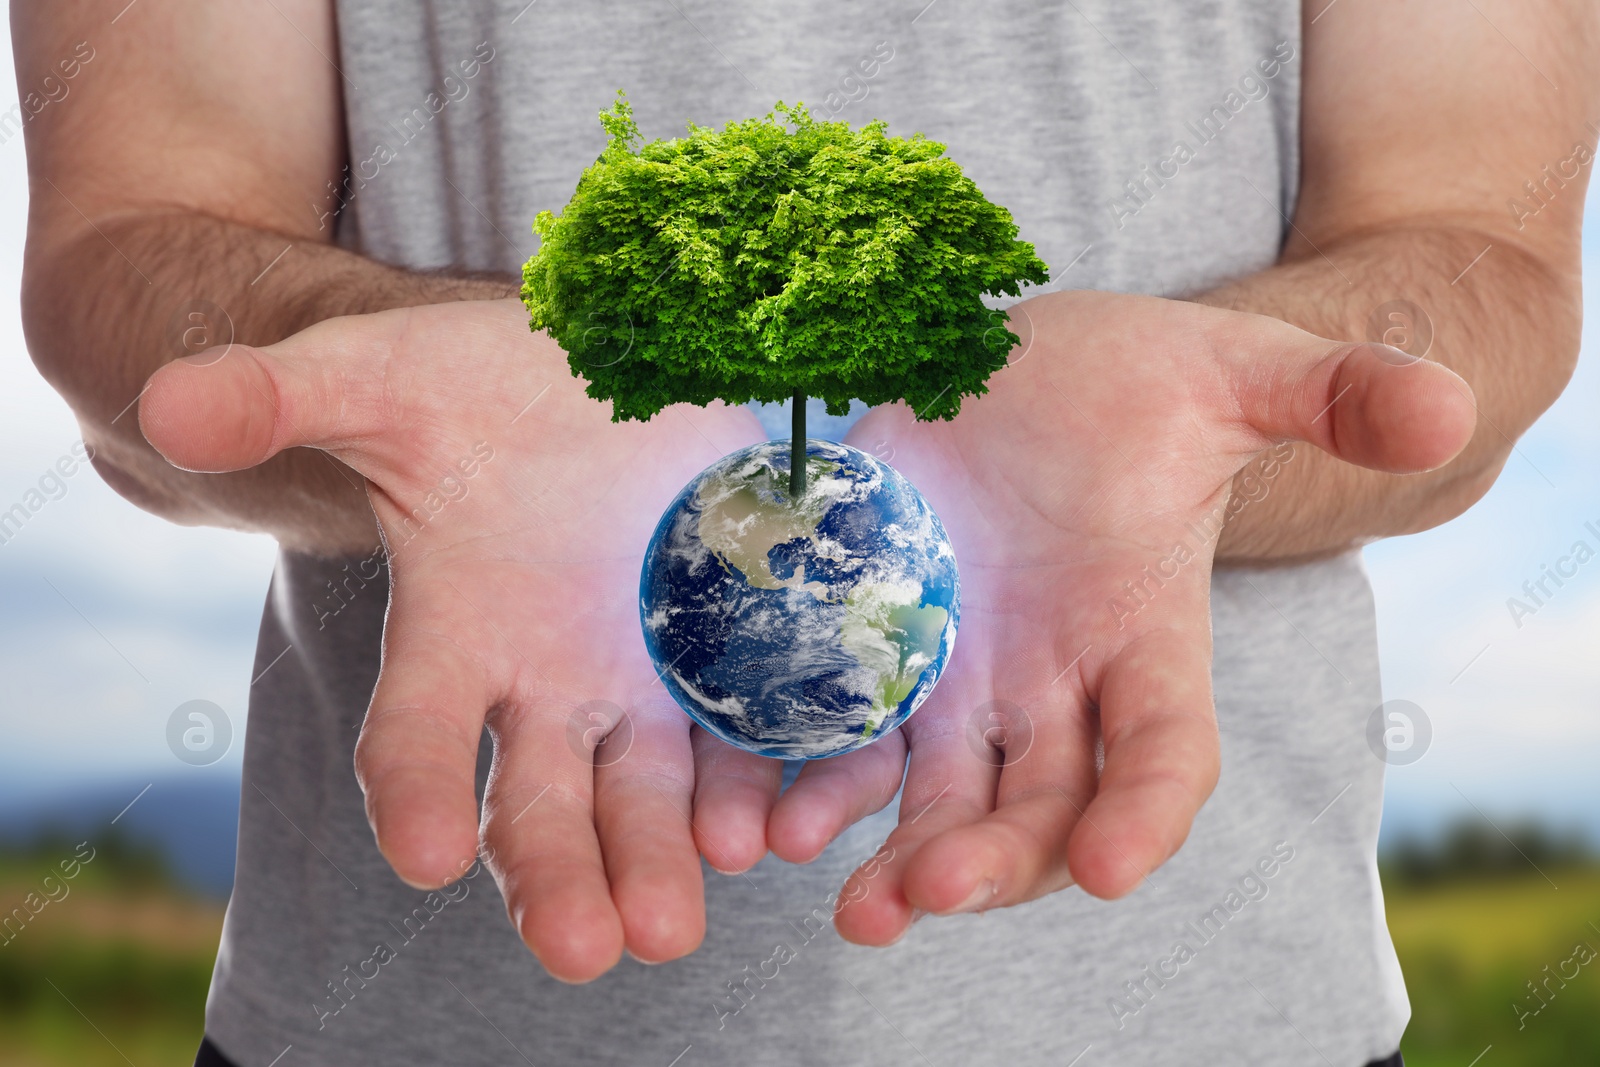 Image of Make Earth green. Man holding globe with tree on top outdoors, closeup